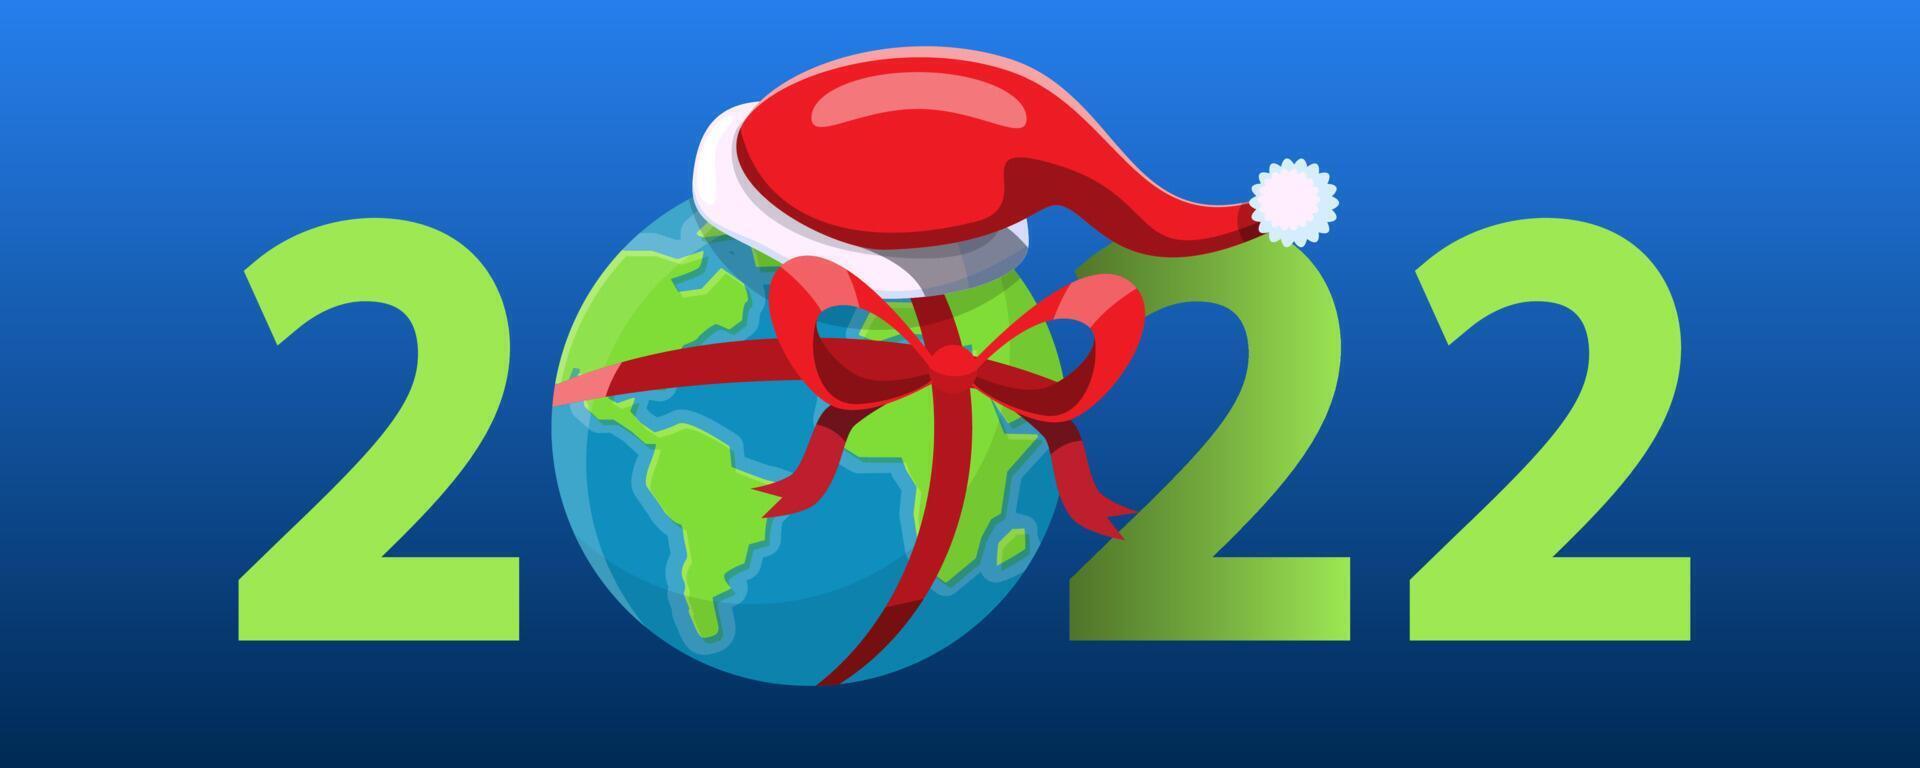 Happy New Year 2022 with a santa claus present a gift box for people on the world. vector